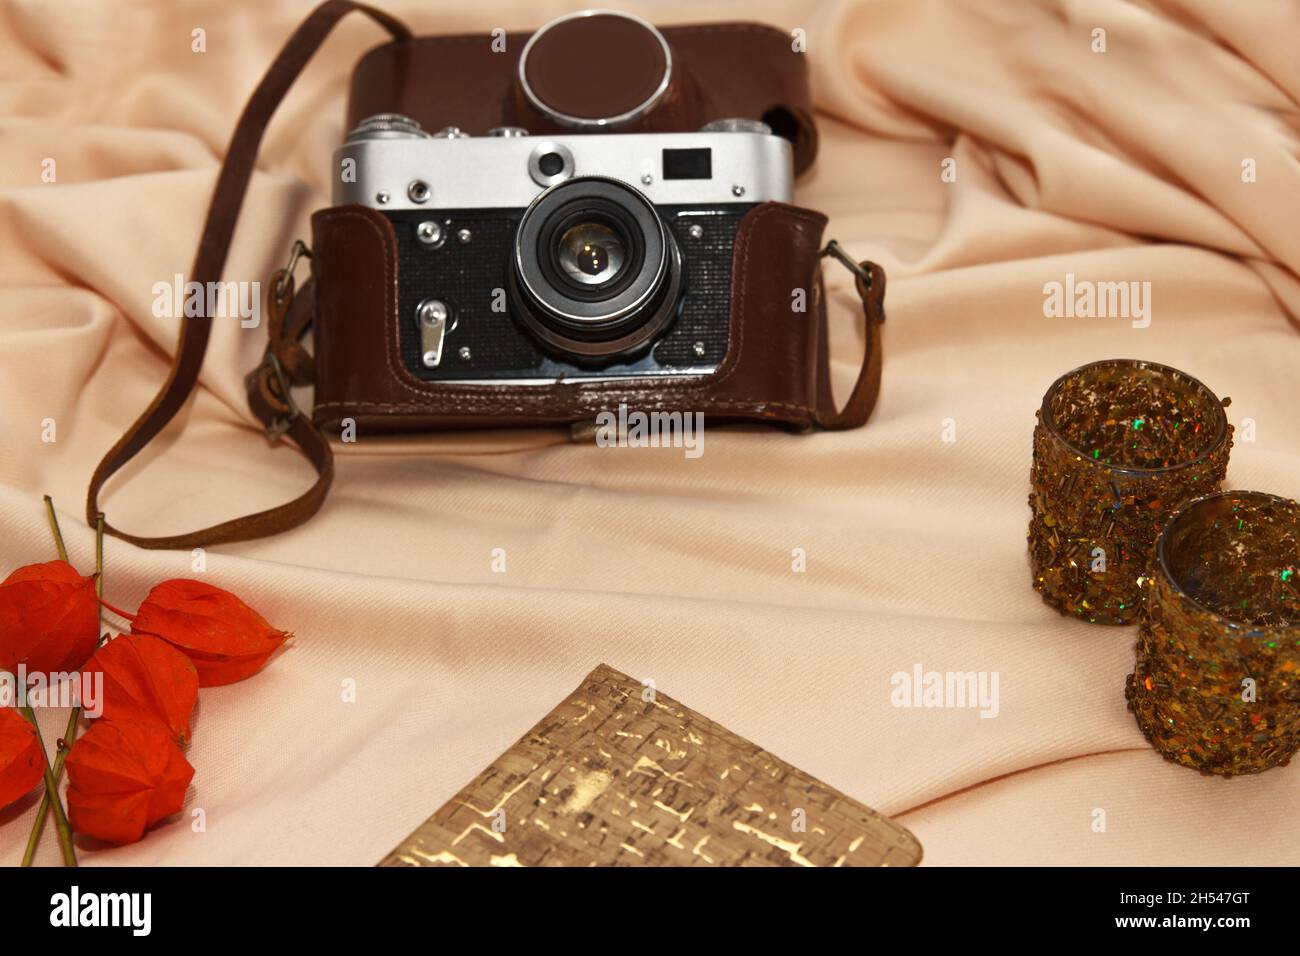 Flatlay. Film camera in case, notebook, fisalis and candlesticks lie on a light beige background. Stock Photo